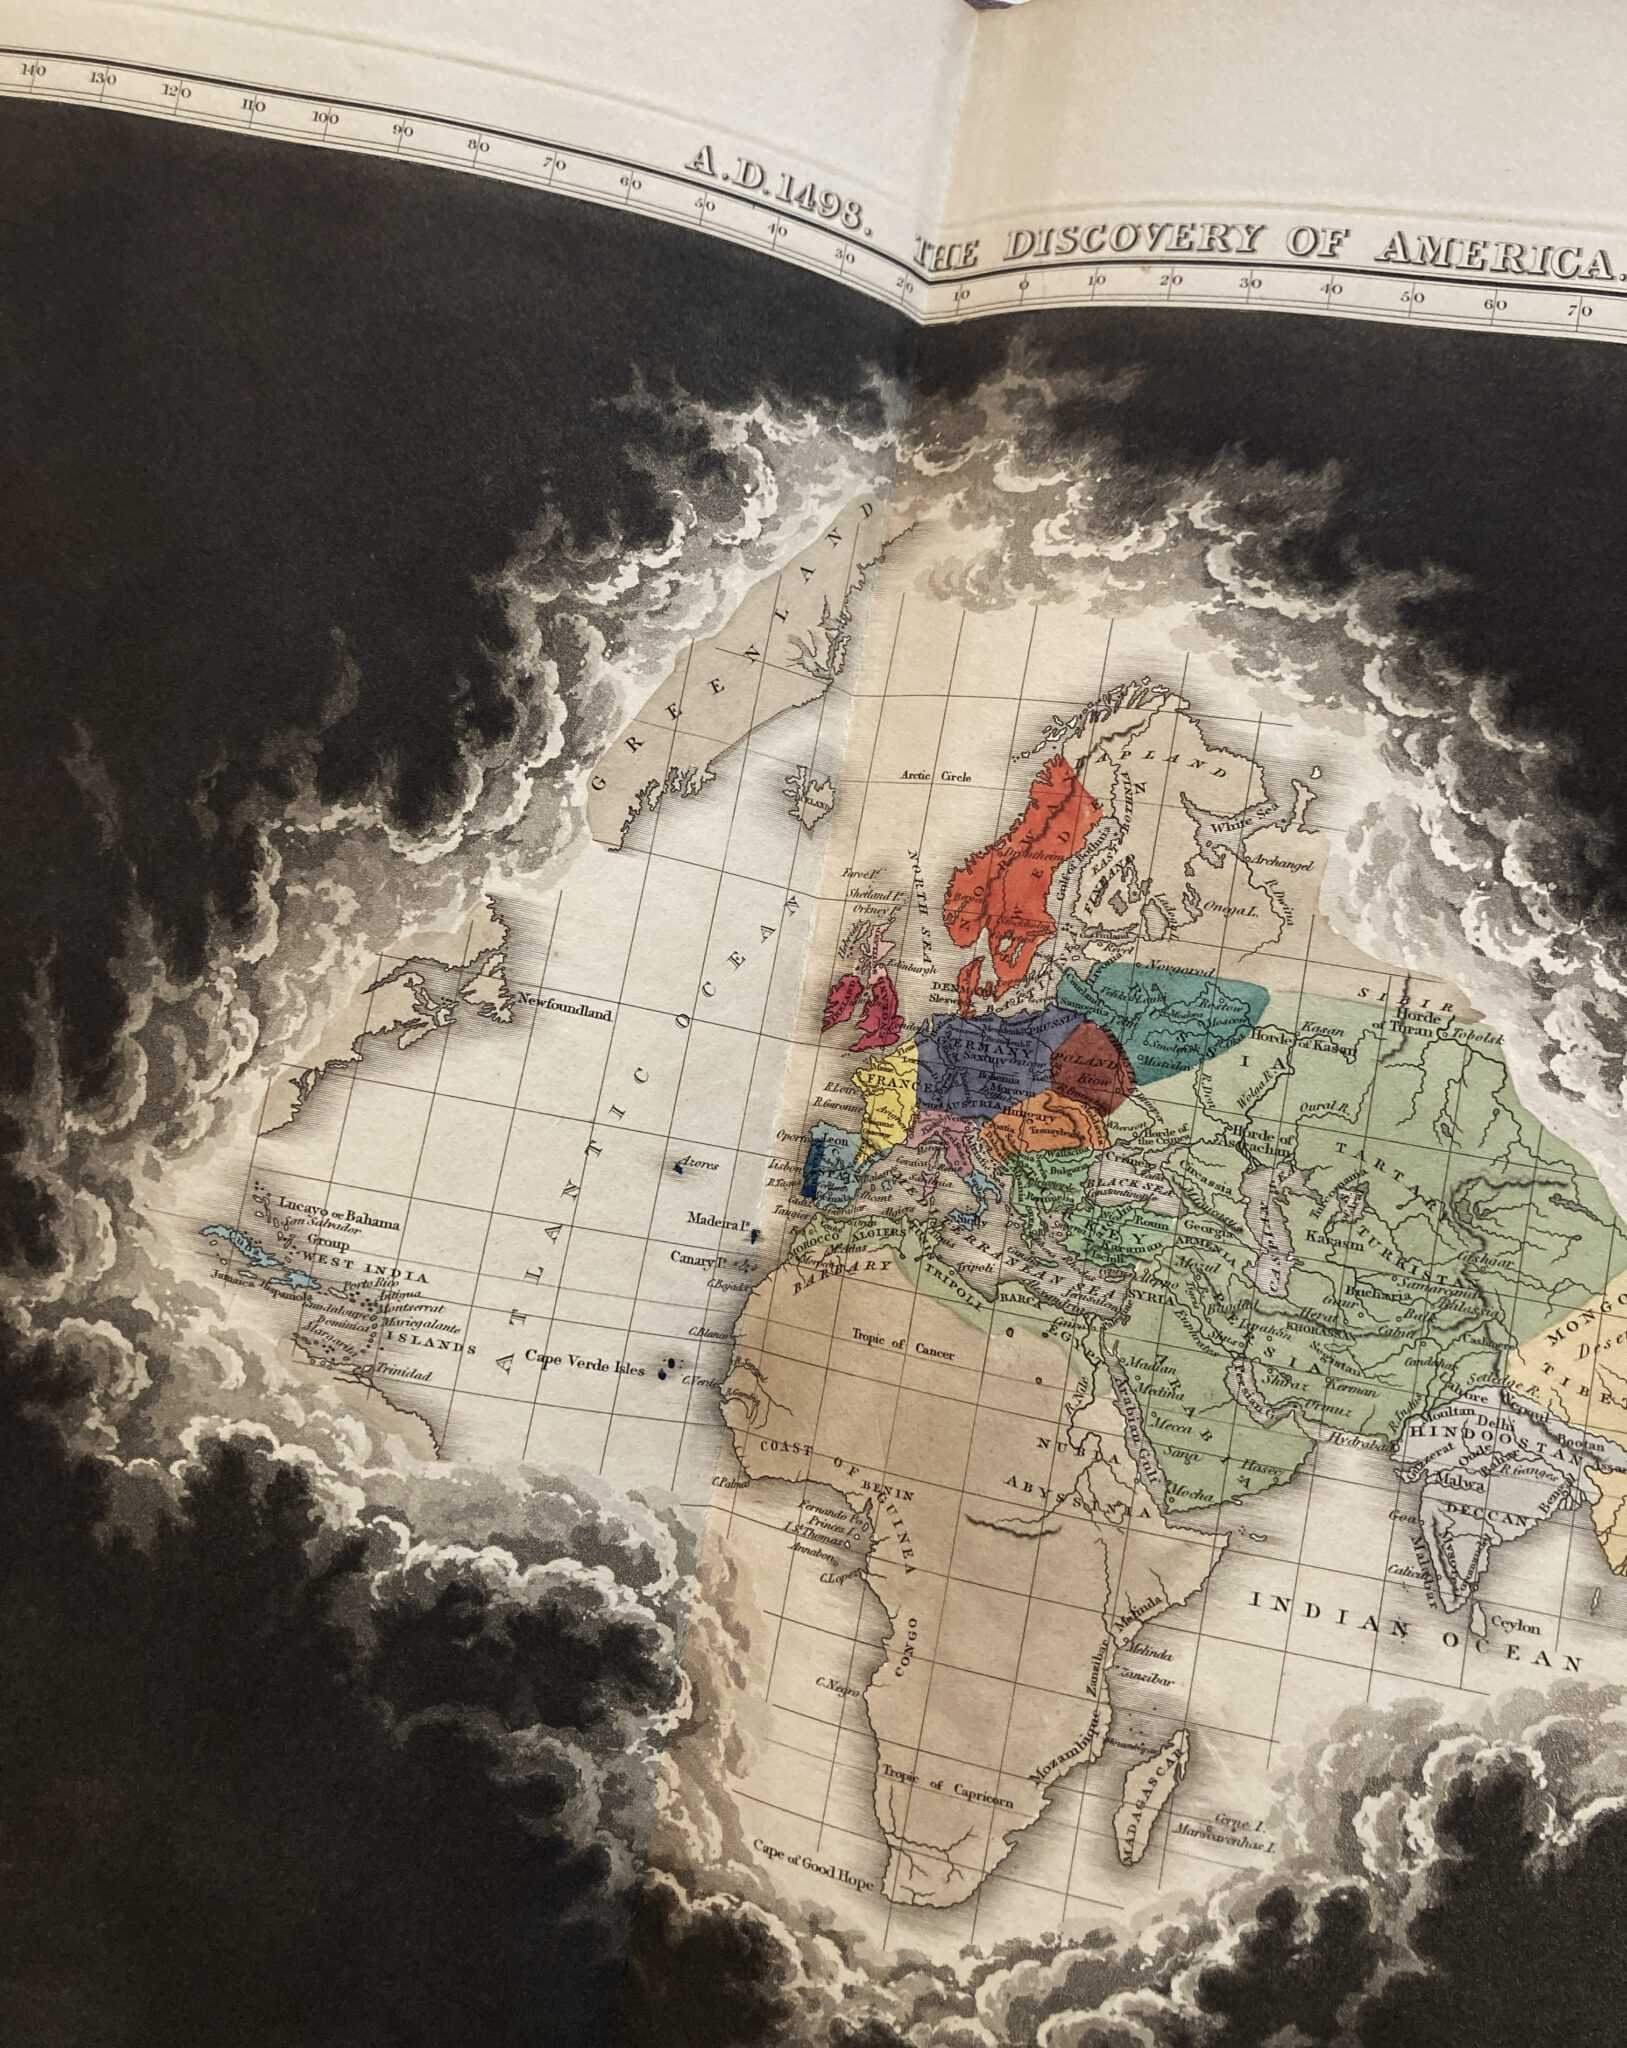 Quin’s famous ‘Historical Atlas’ (1830): a masterpiece of atlas printing and colouring